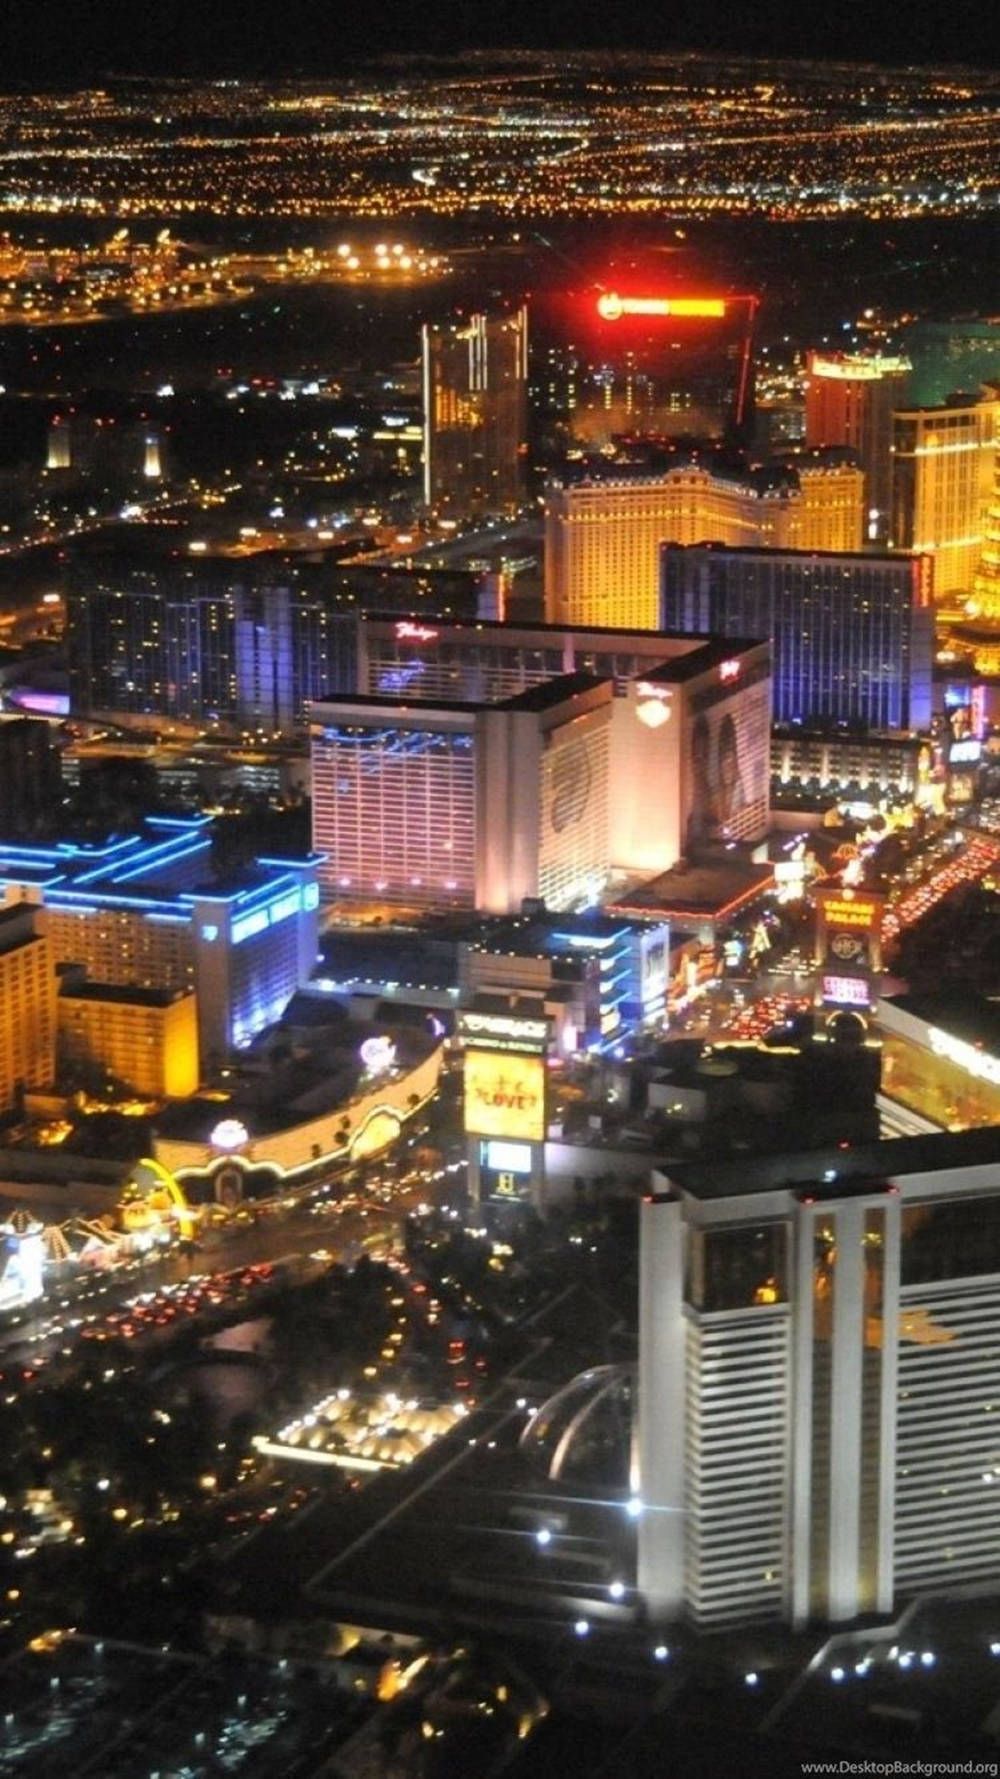 Las Vegas at night wallpaper for iPhone and Android - Las Vegas